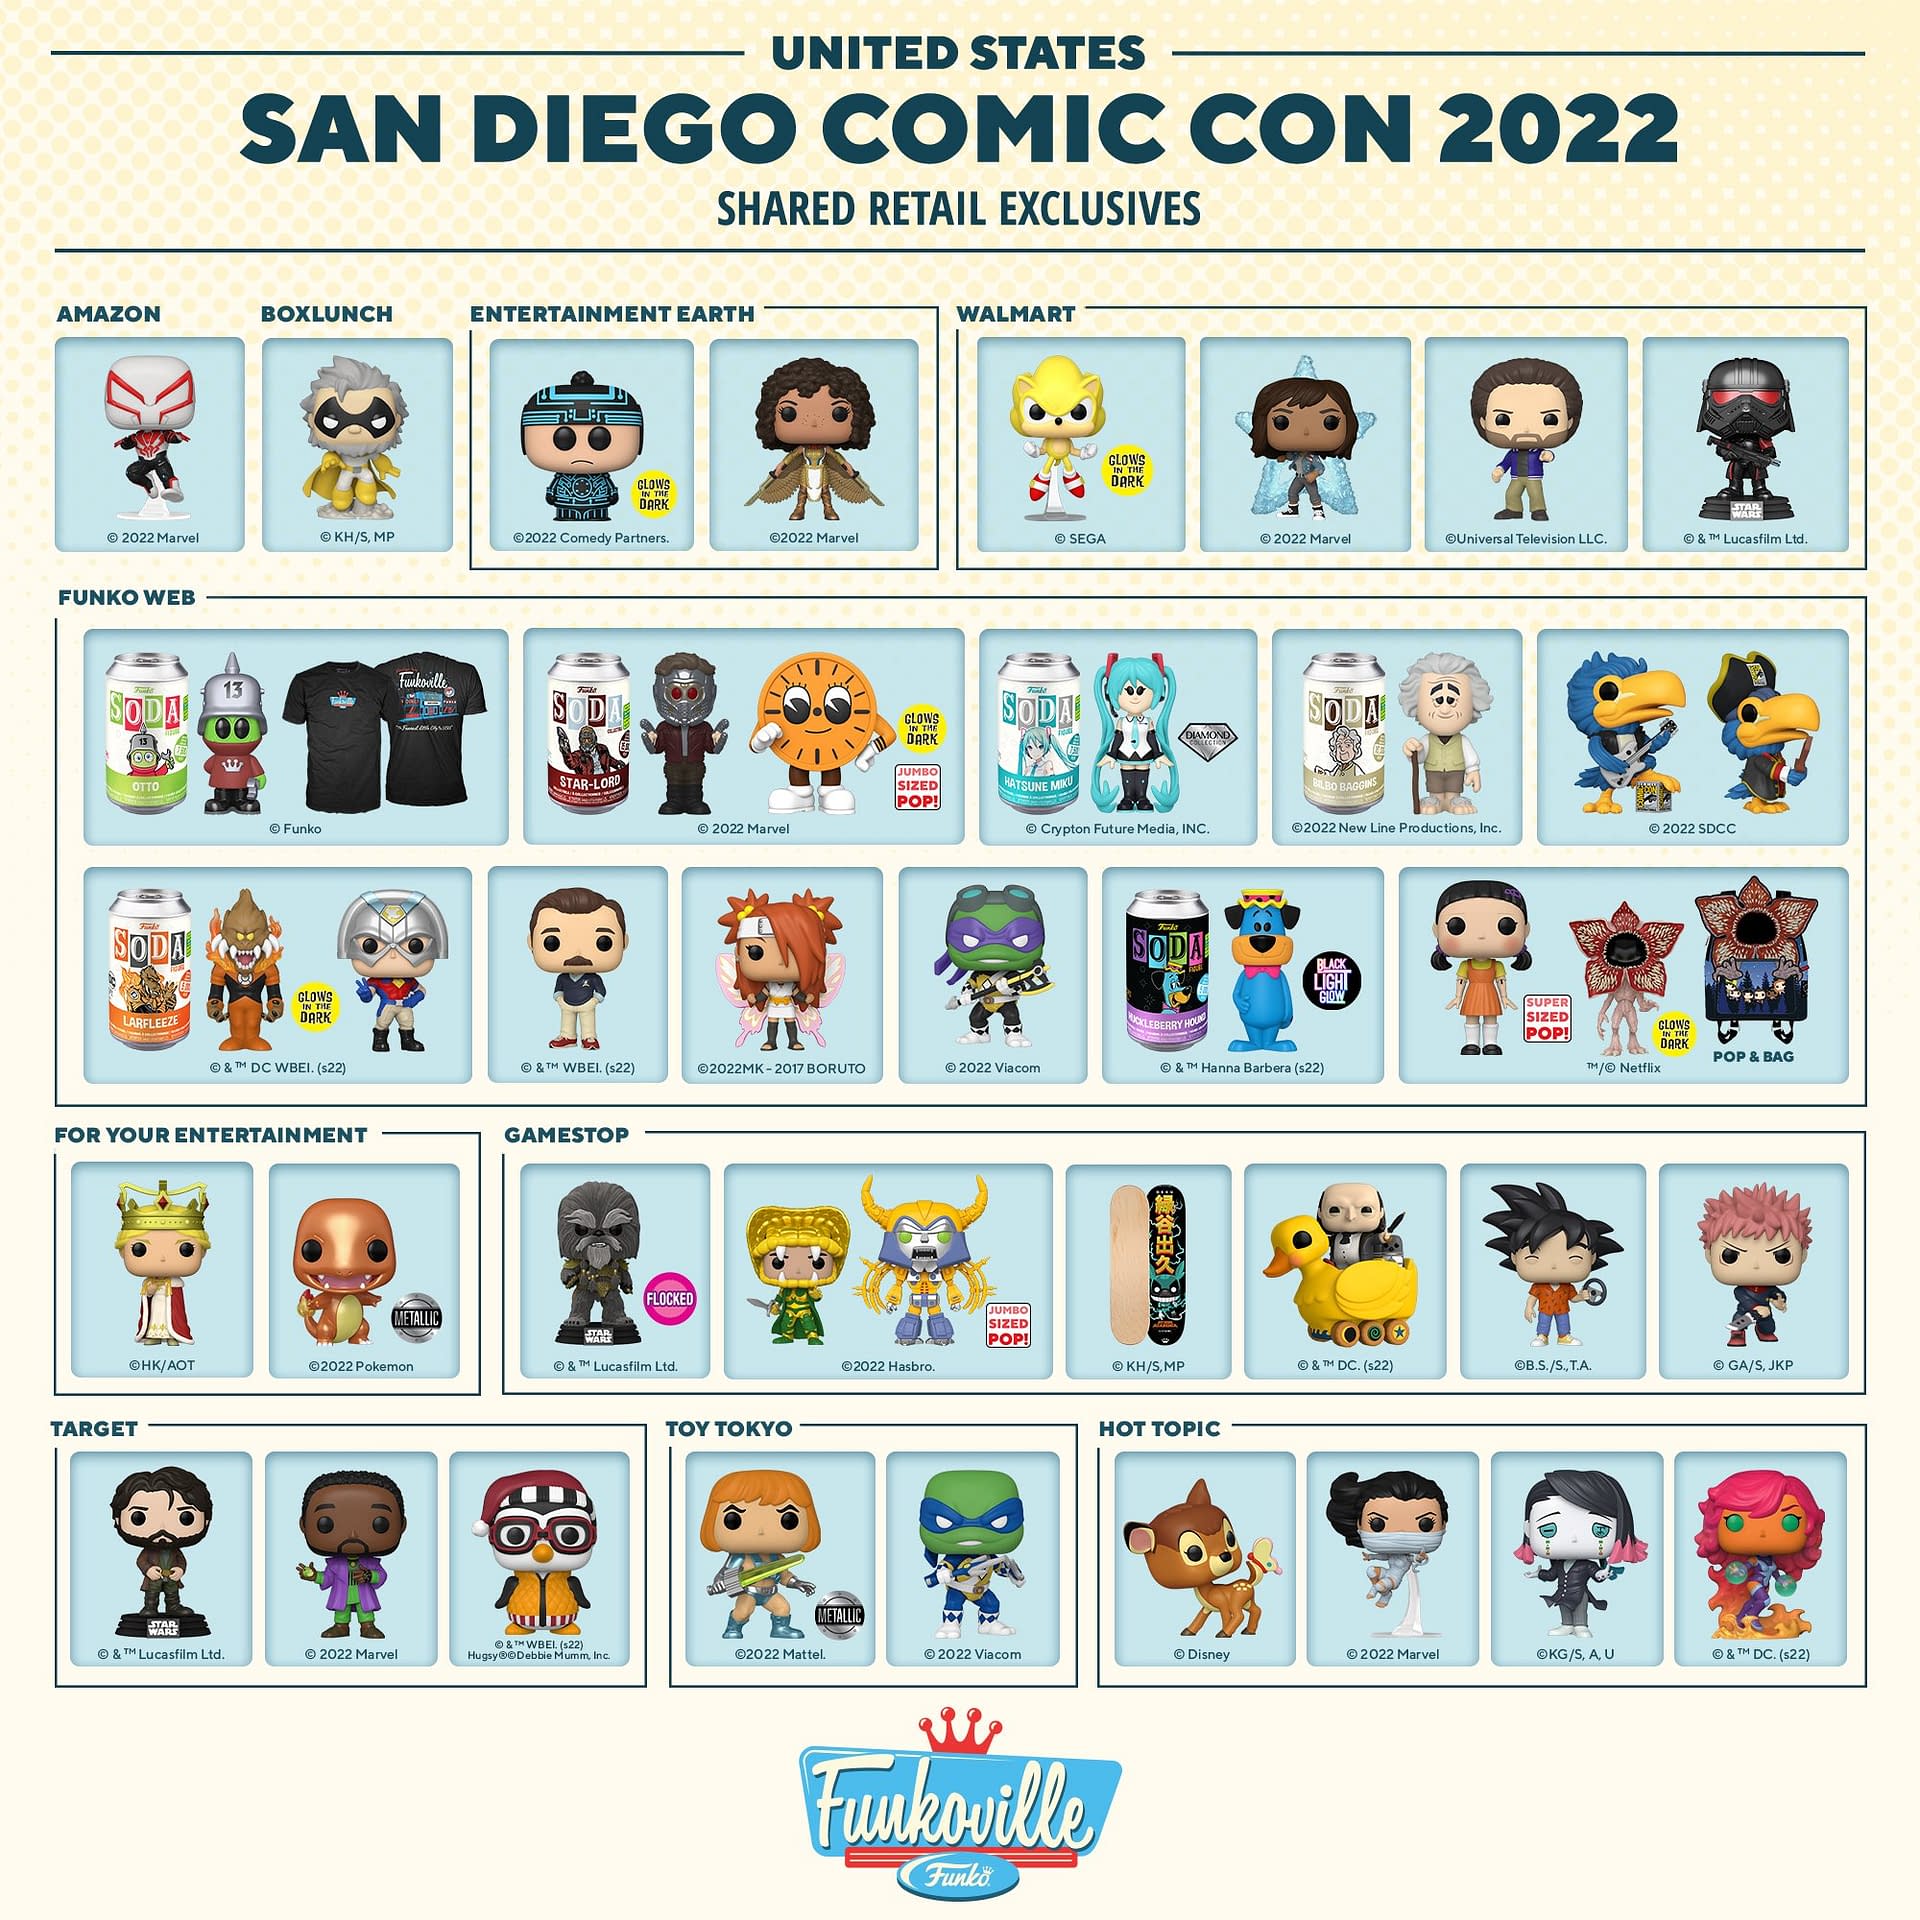 Full Funko 2022 SDCC Reveals List and Shared Retailer Locations